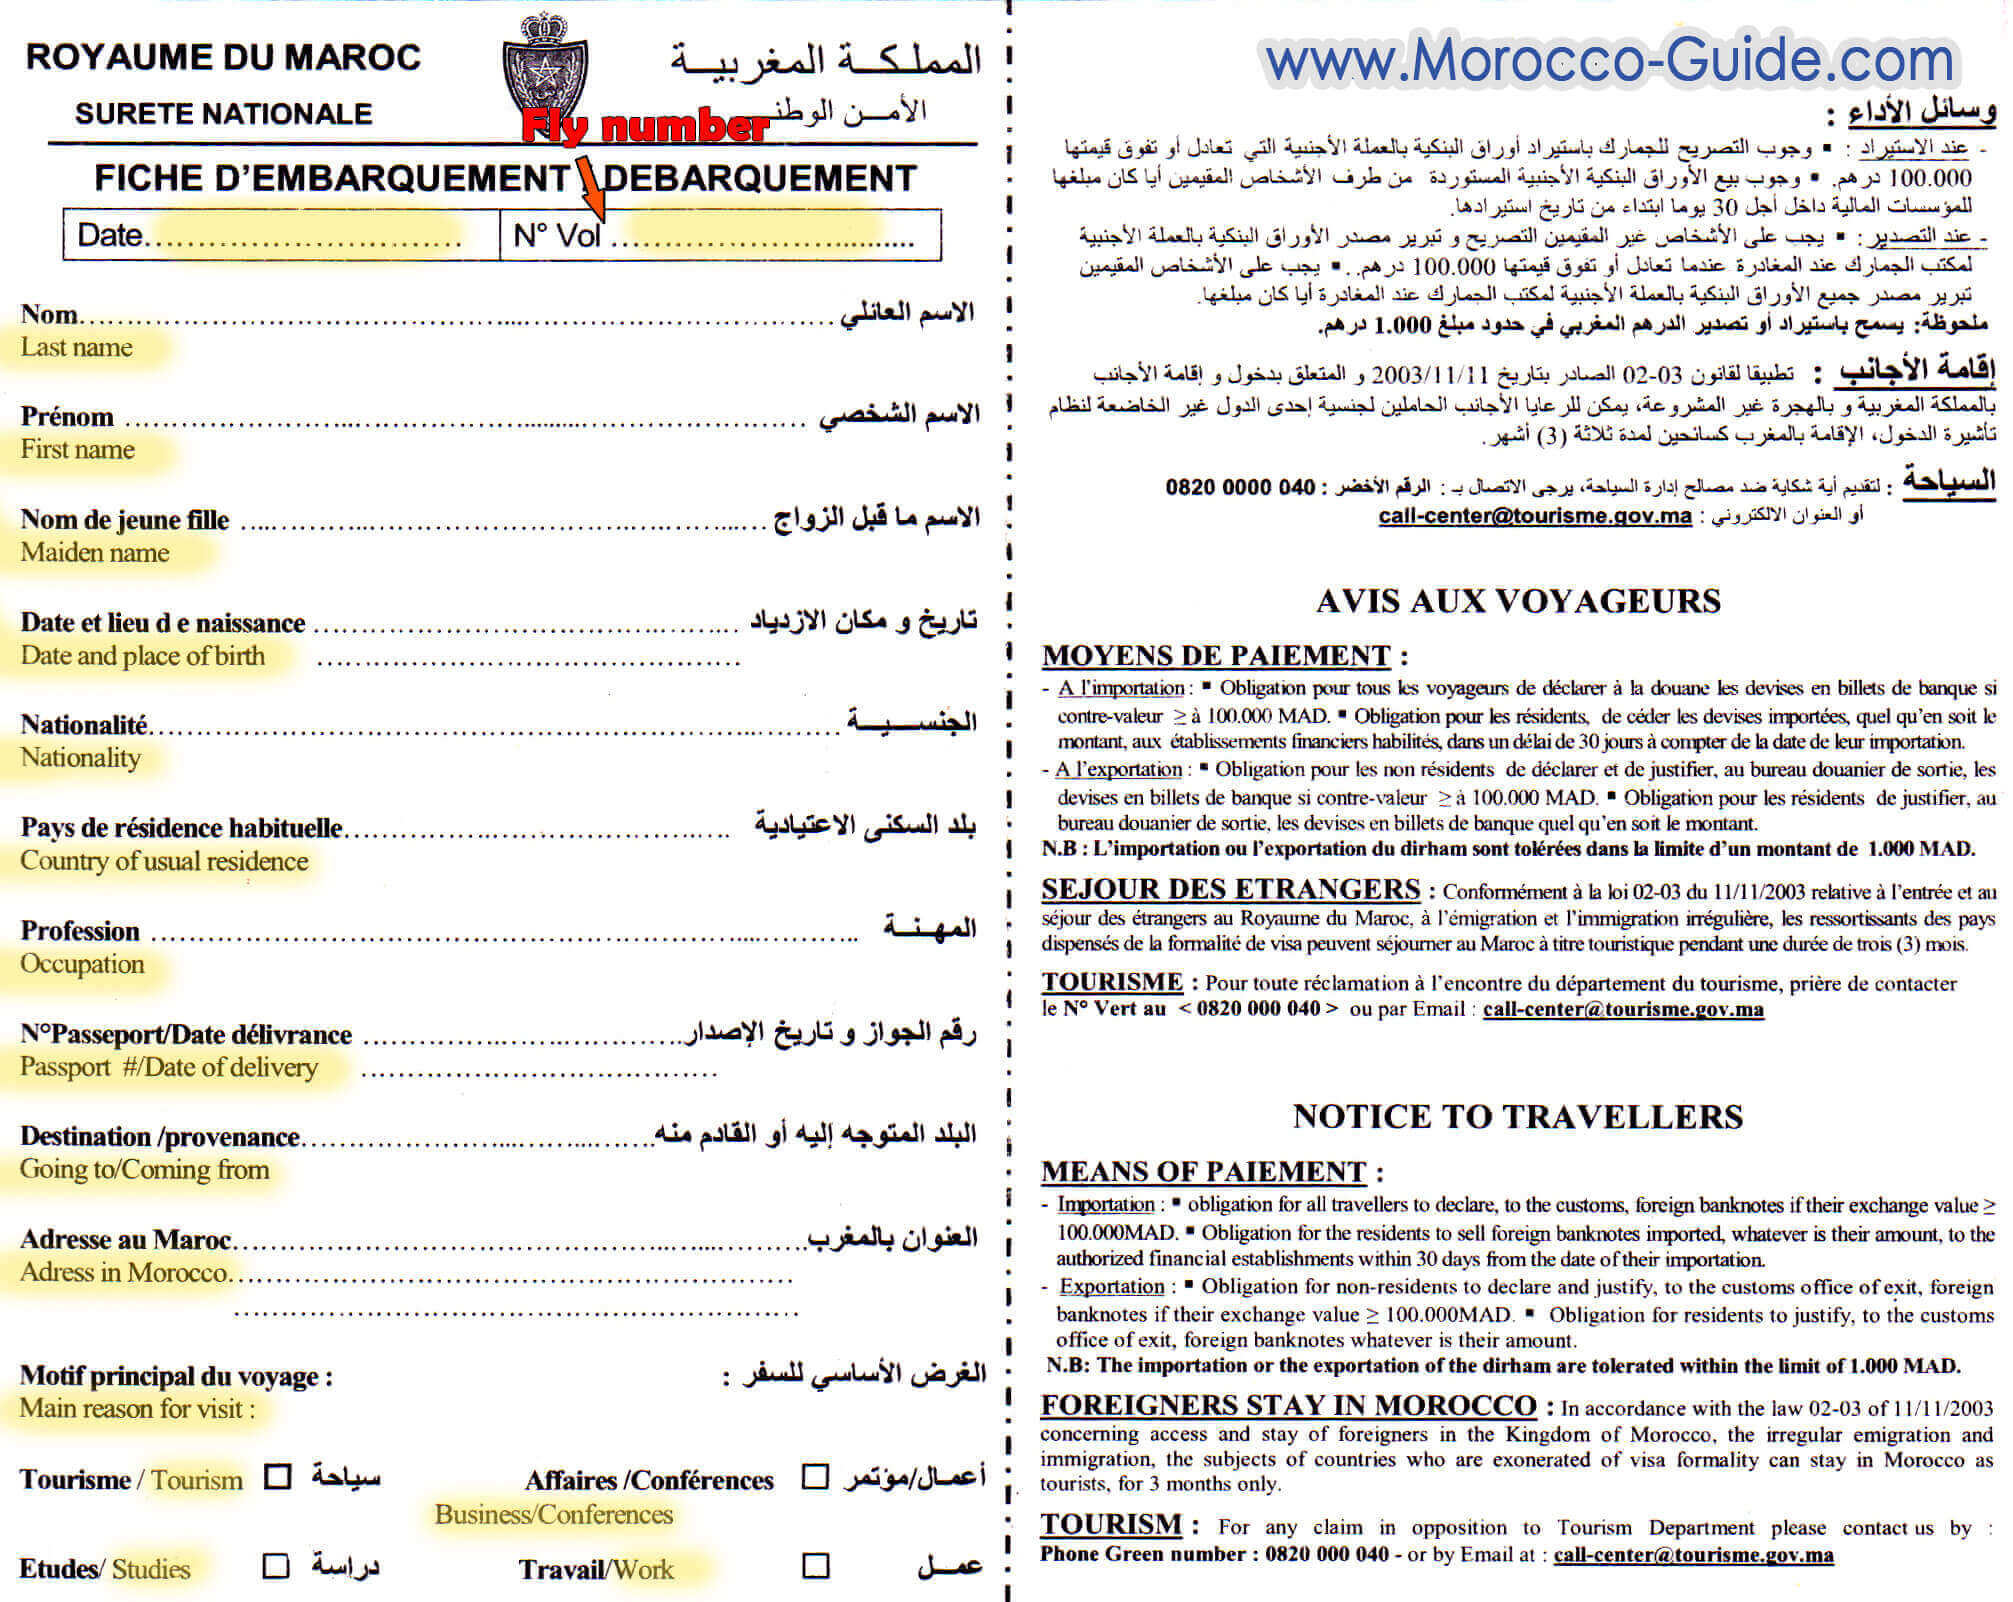 travel documents for morocco